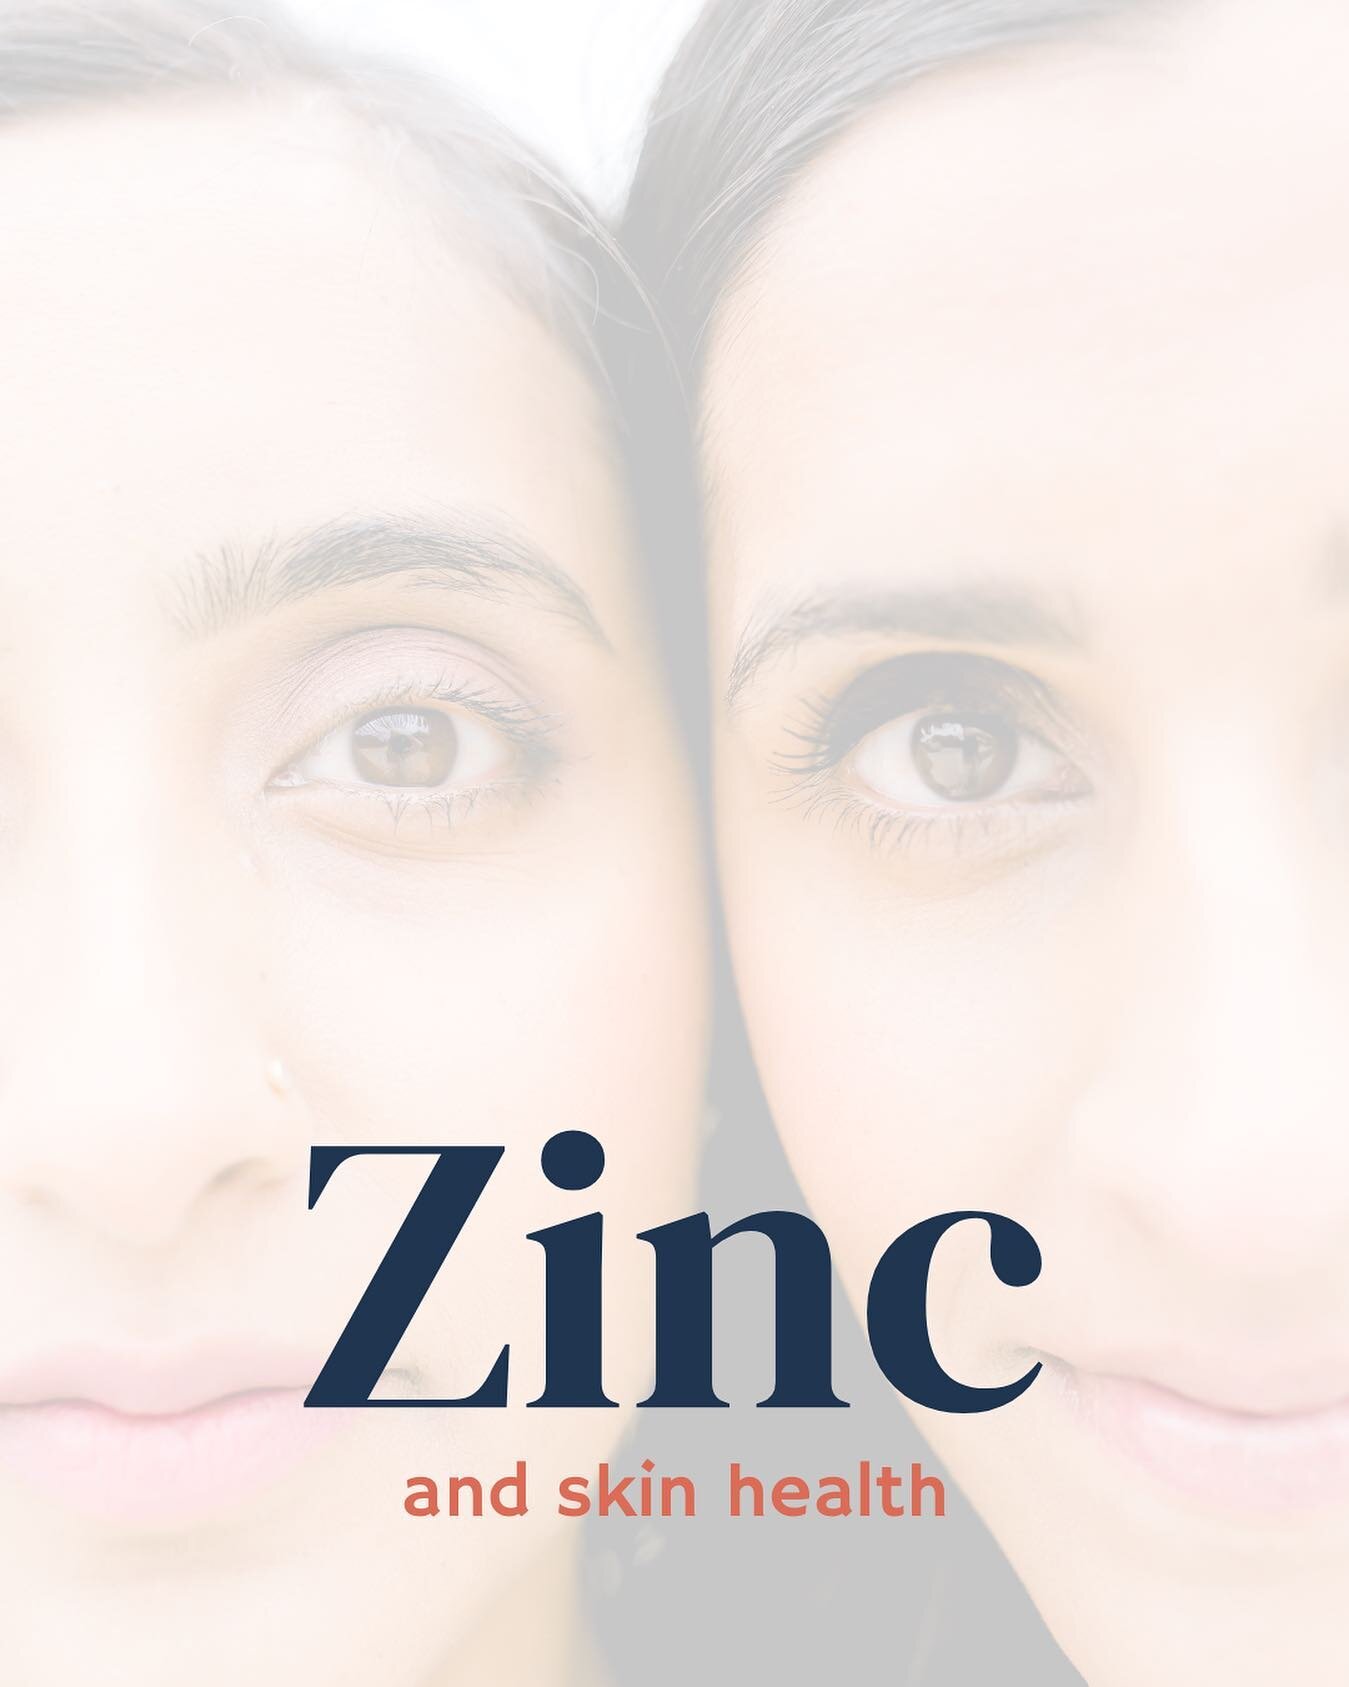 Let's talk about a HOT topic: Skin and zinc.

But first, a disclaimer 🤚🏾. I am not a doctor or dermatologist, so if you have specific questions about skin conditions, please see a trained specialist. 

Why am I sharing about this topic then? The li